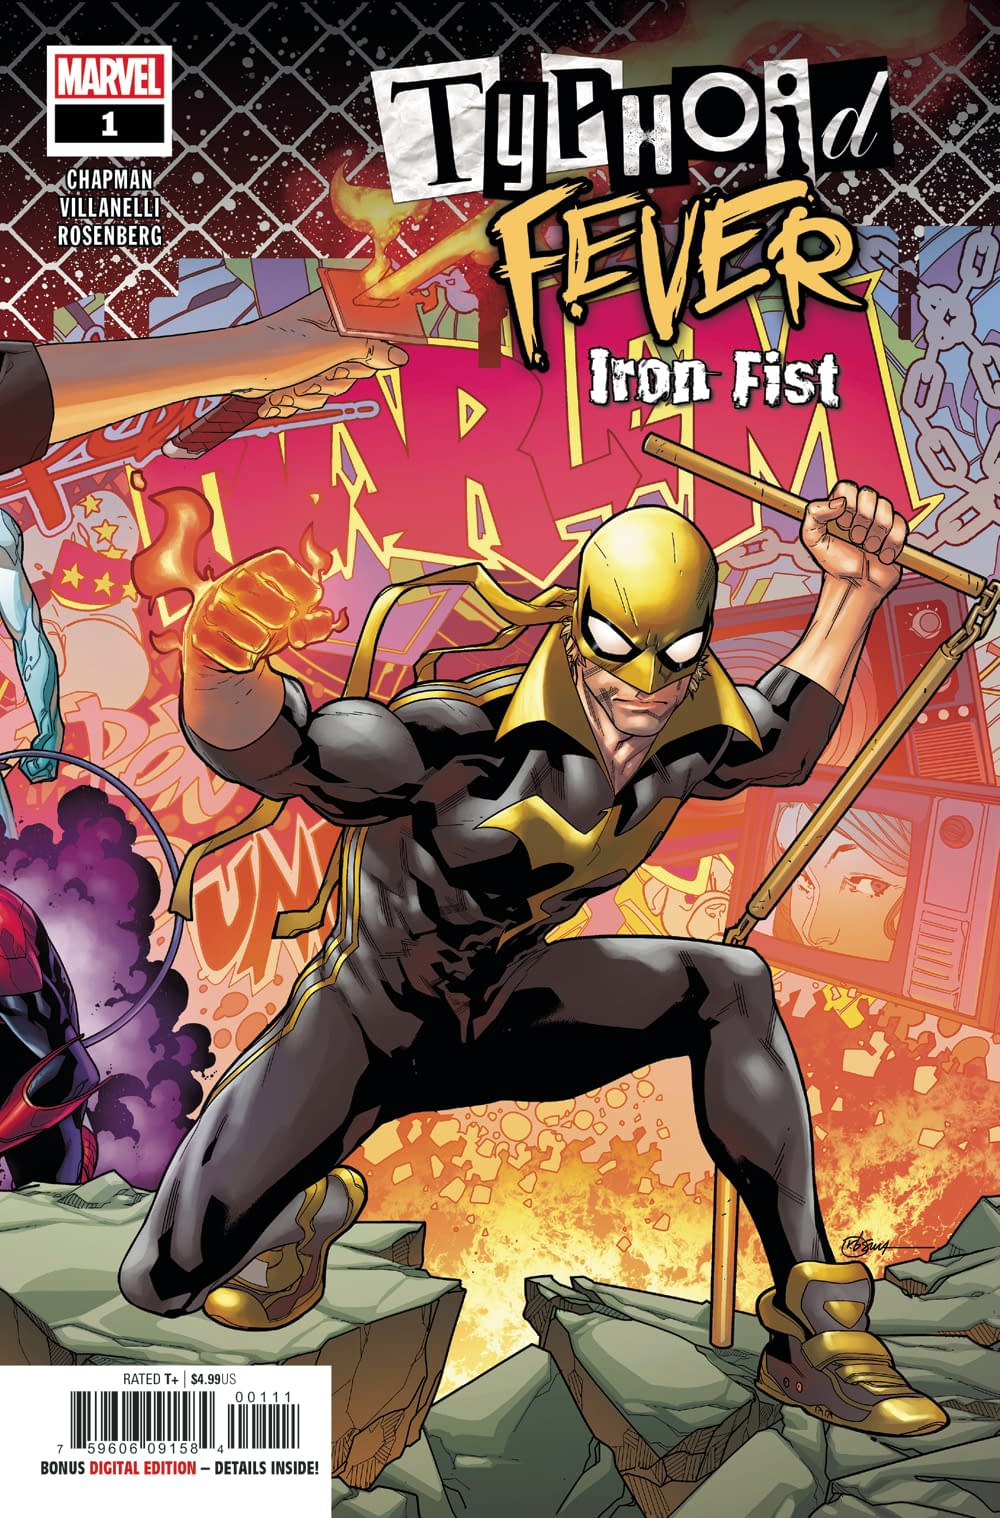 Mary Plans to Reboot the Bible in Next Week's Typhoid Fever: Iron Fist